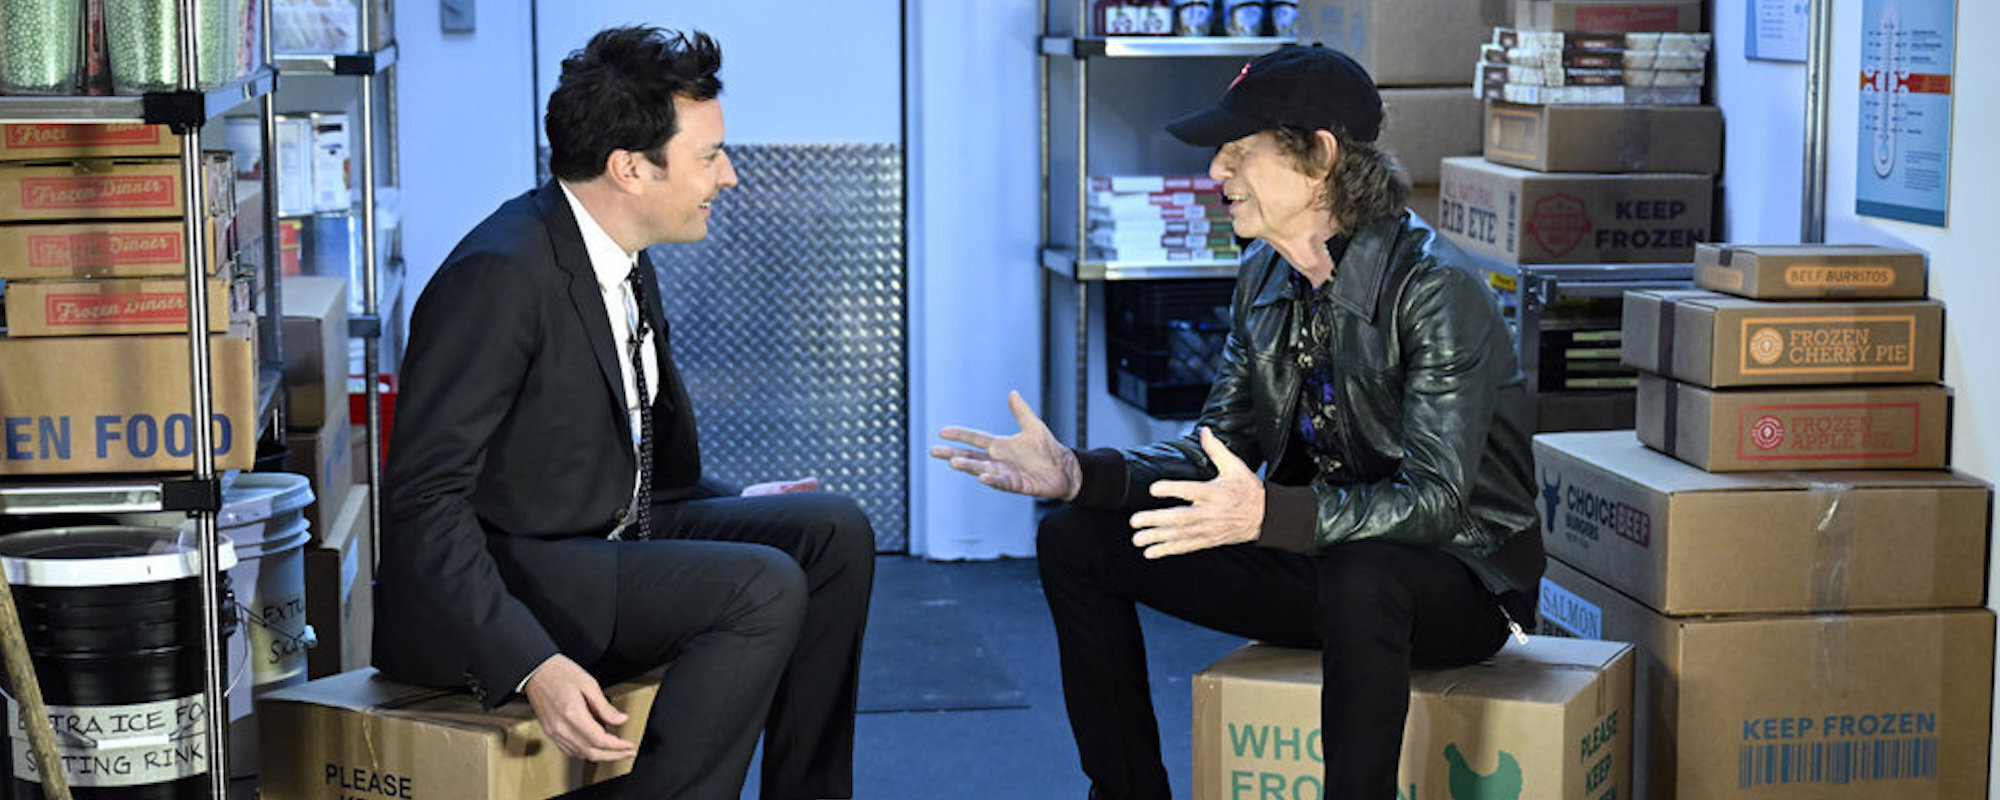 Mick Jagger Admits He “Did Get Satisfaction Once” in Absurd ‘Tonight Show’ Skit